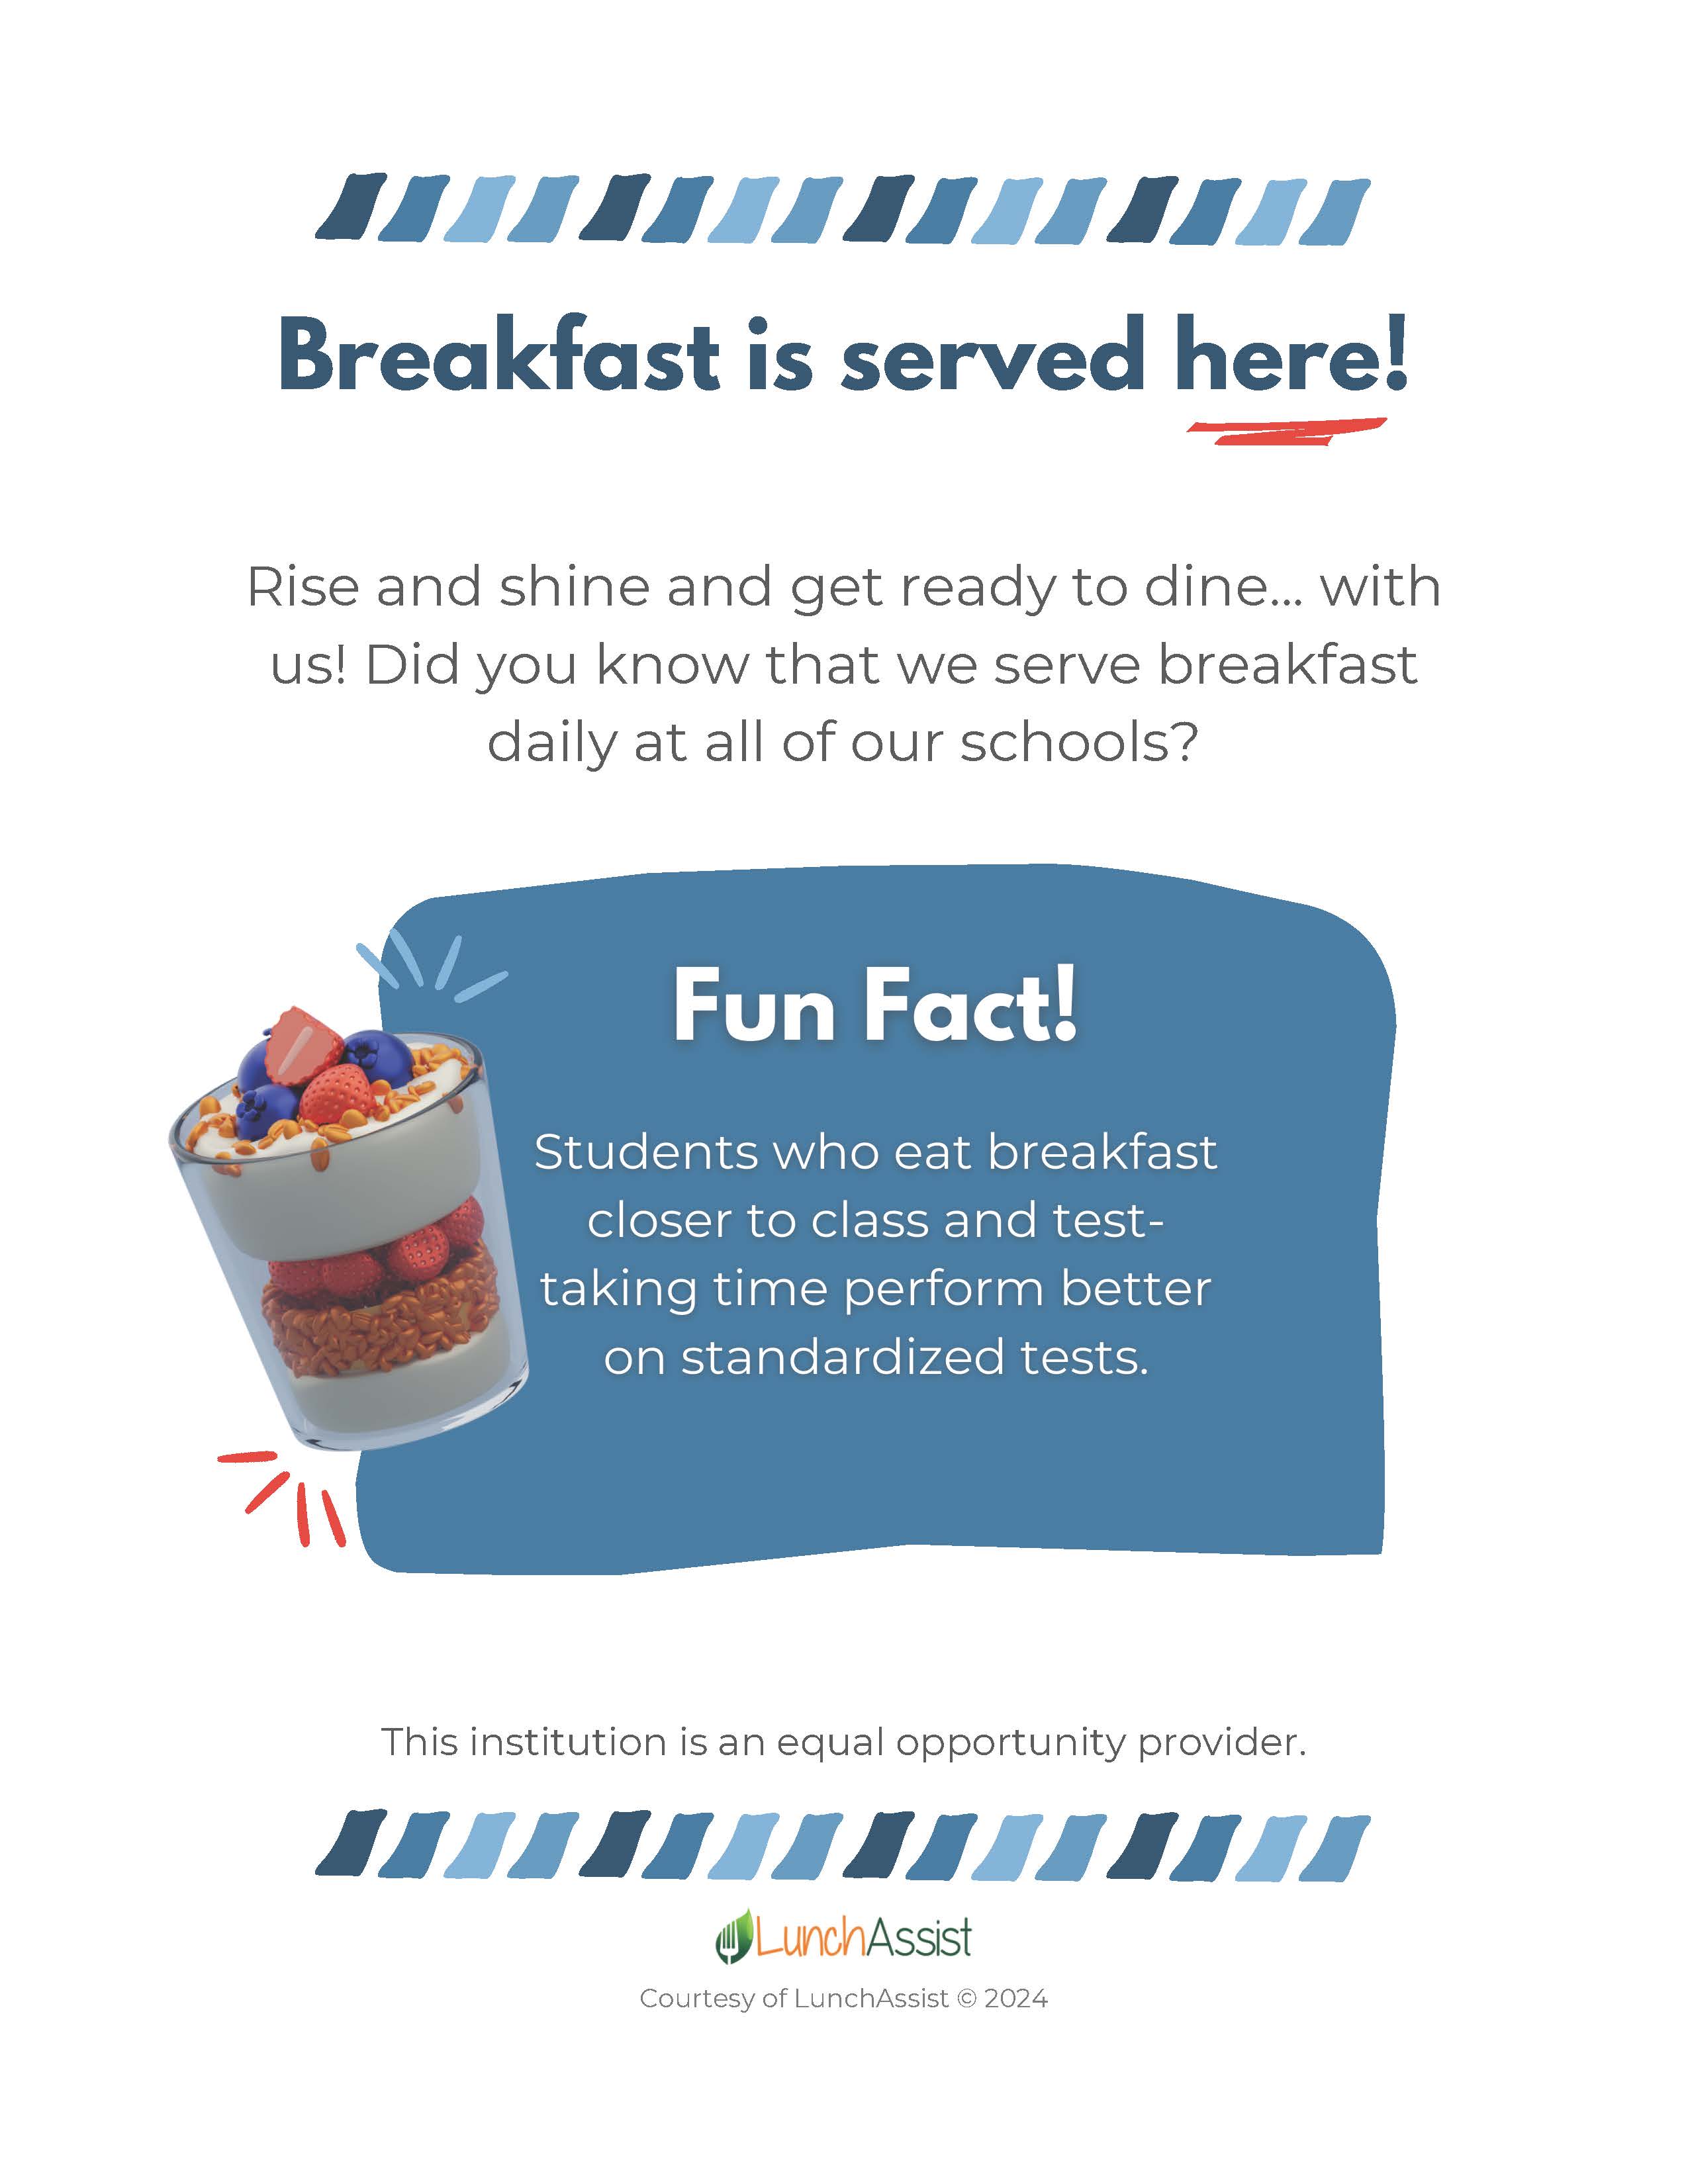 Breakfast Outreach Flyer, LunchAssist (2024)_Page_1.jpg